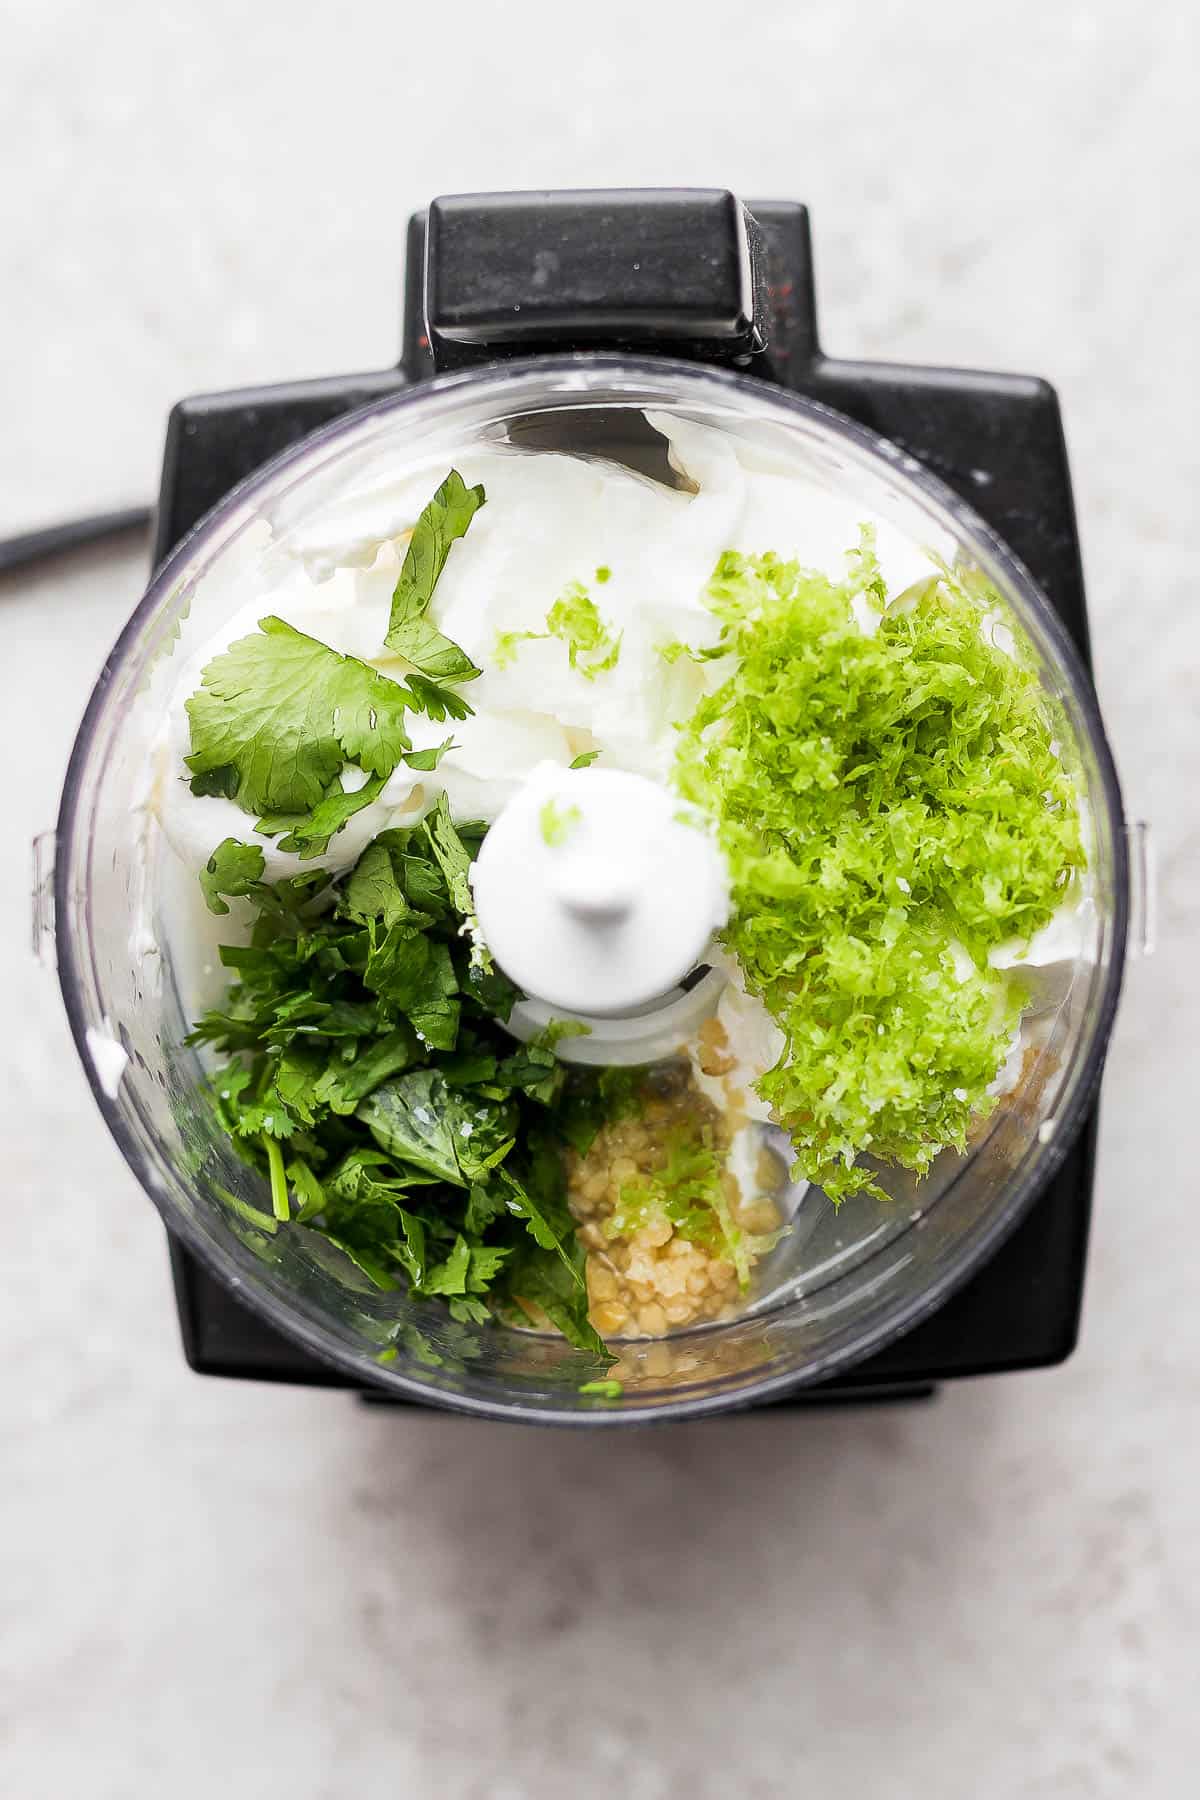 All of the ingredients in a food processor. 